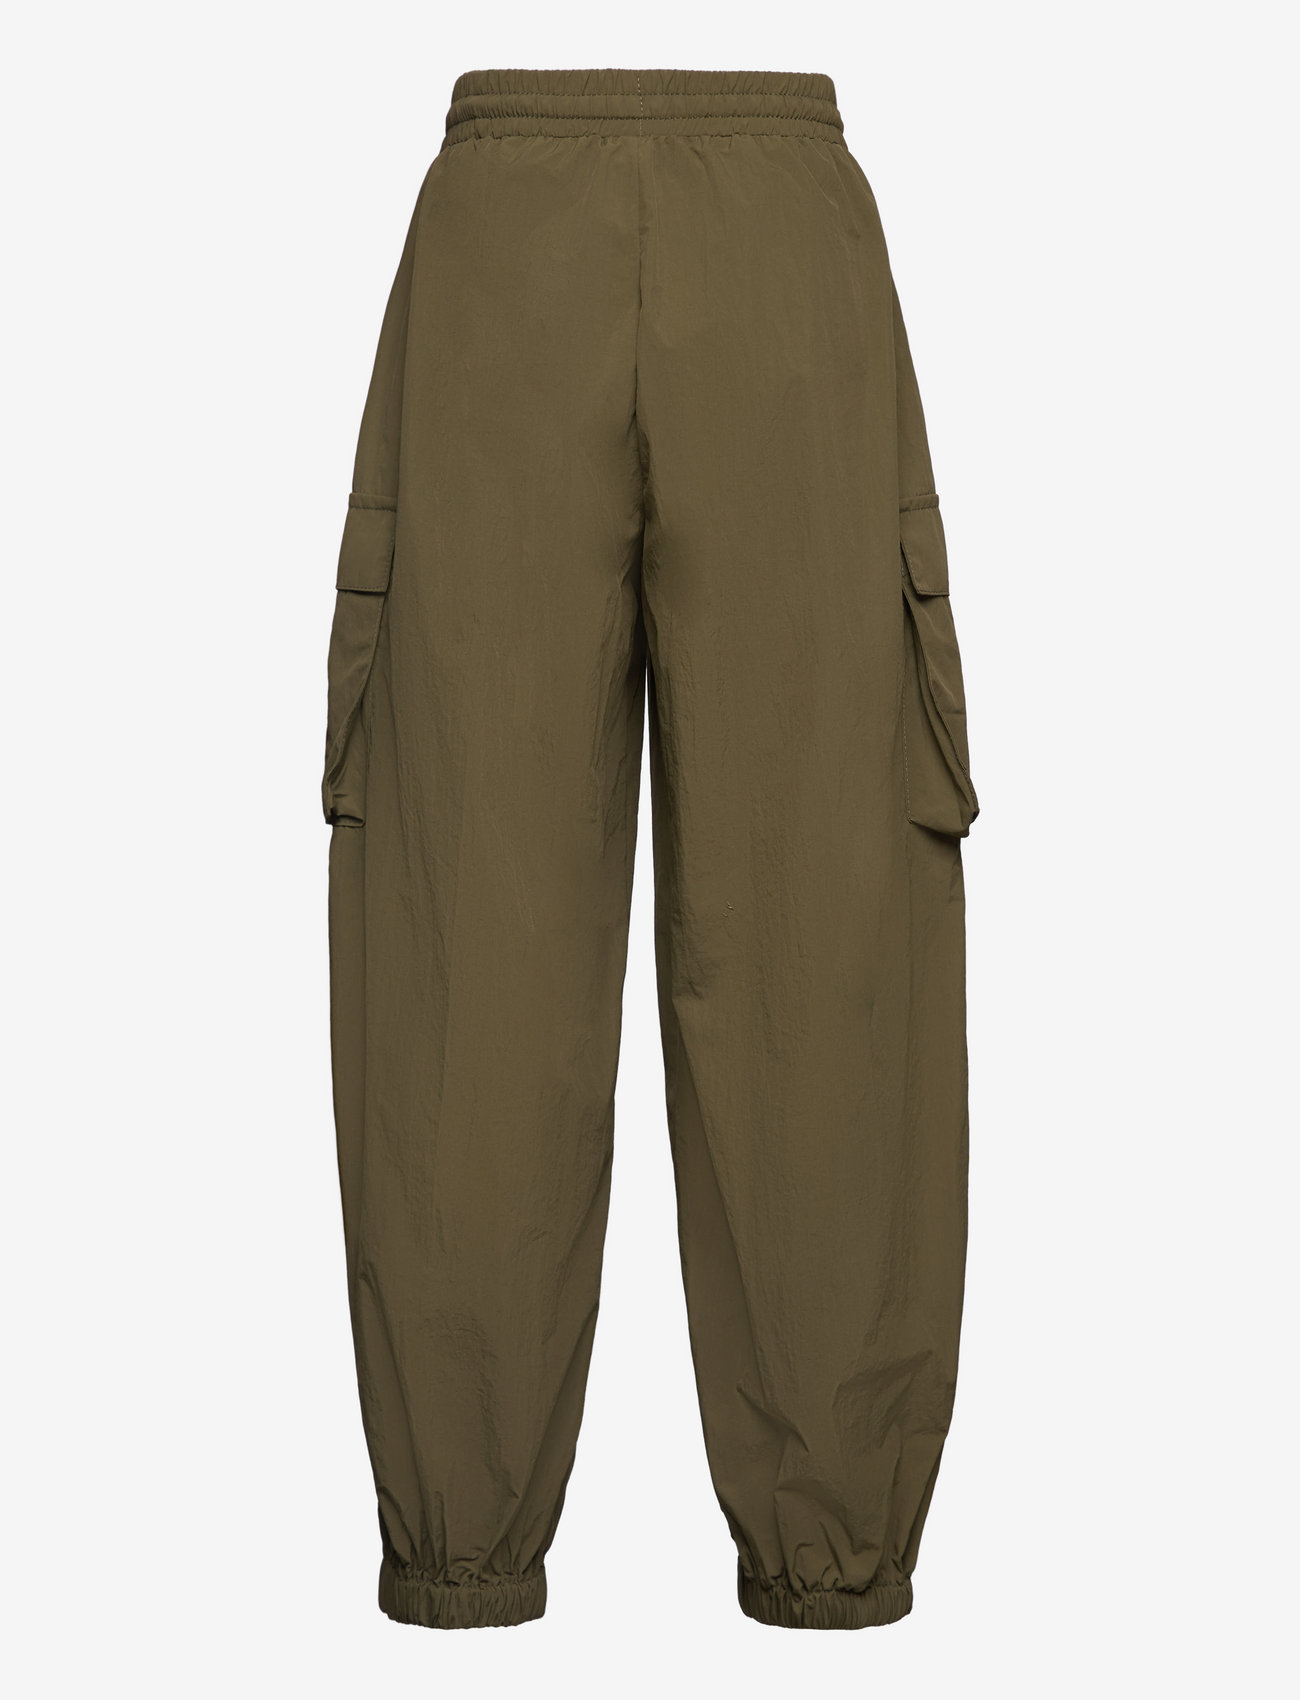 Sofie Schnoor Young - Trousers - kelnės - army green - 1